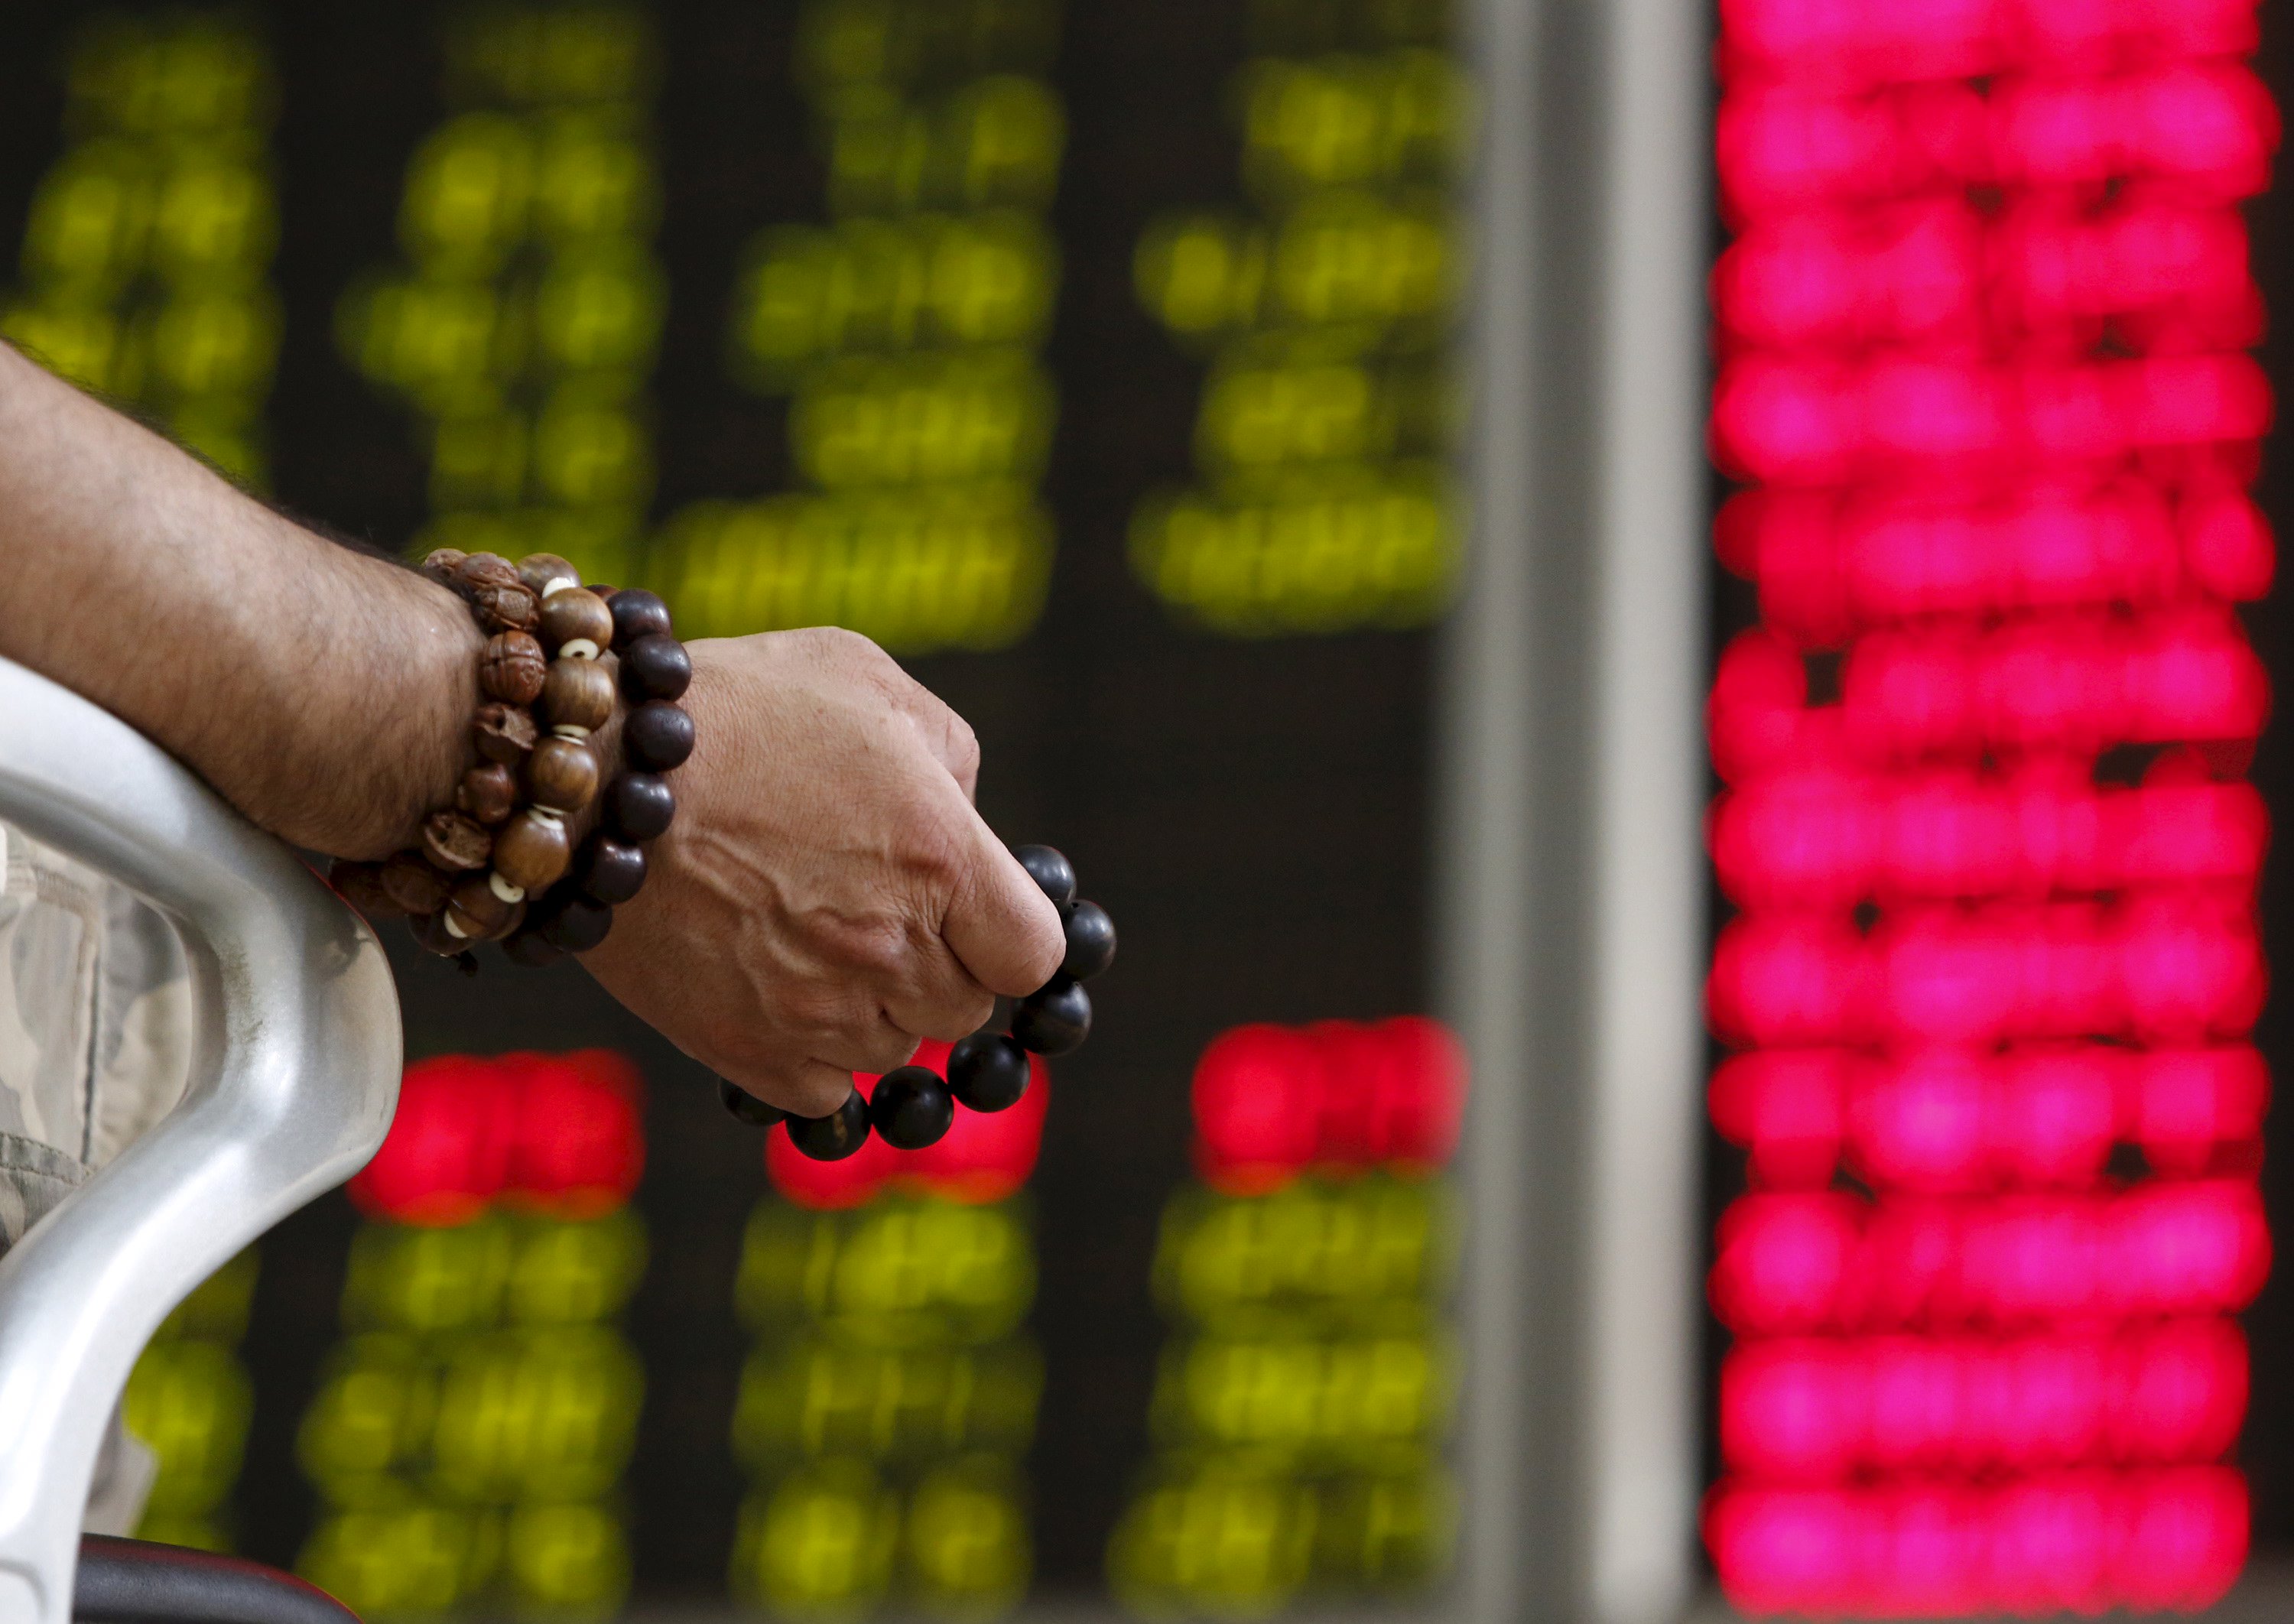 An investor holds onto prayer beads as he watches a board showing stock prices at a brokerage office in Beijing, China, in this July 6, 2015 file photo. After months trying to convince investors to come back to China's battered stock markets, there are signs authorities may be getting their wish as money starts flowing back in. China's benchmark Shanghai stock index is still a third below its June peak, but there are unquestionable signs of life in the market. REUTERS/Kim Kyung-Hoon/Files